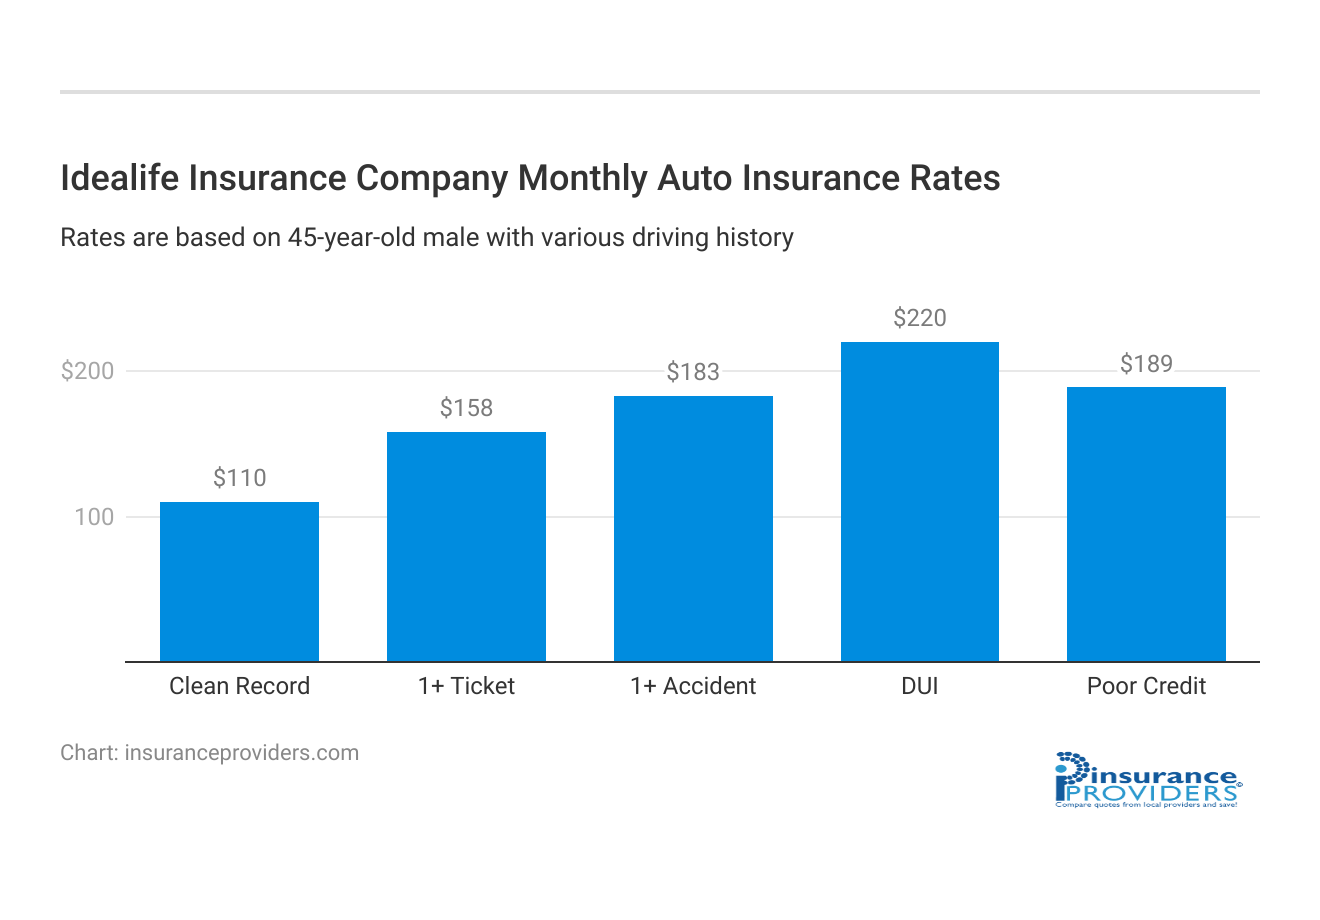 <h3>Idealife Insurance Company Monthly Auto Insurance Rates</h3>